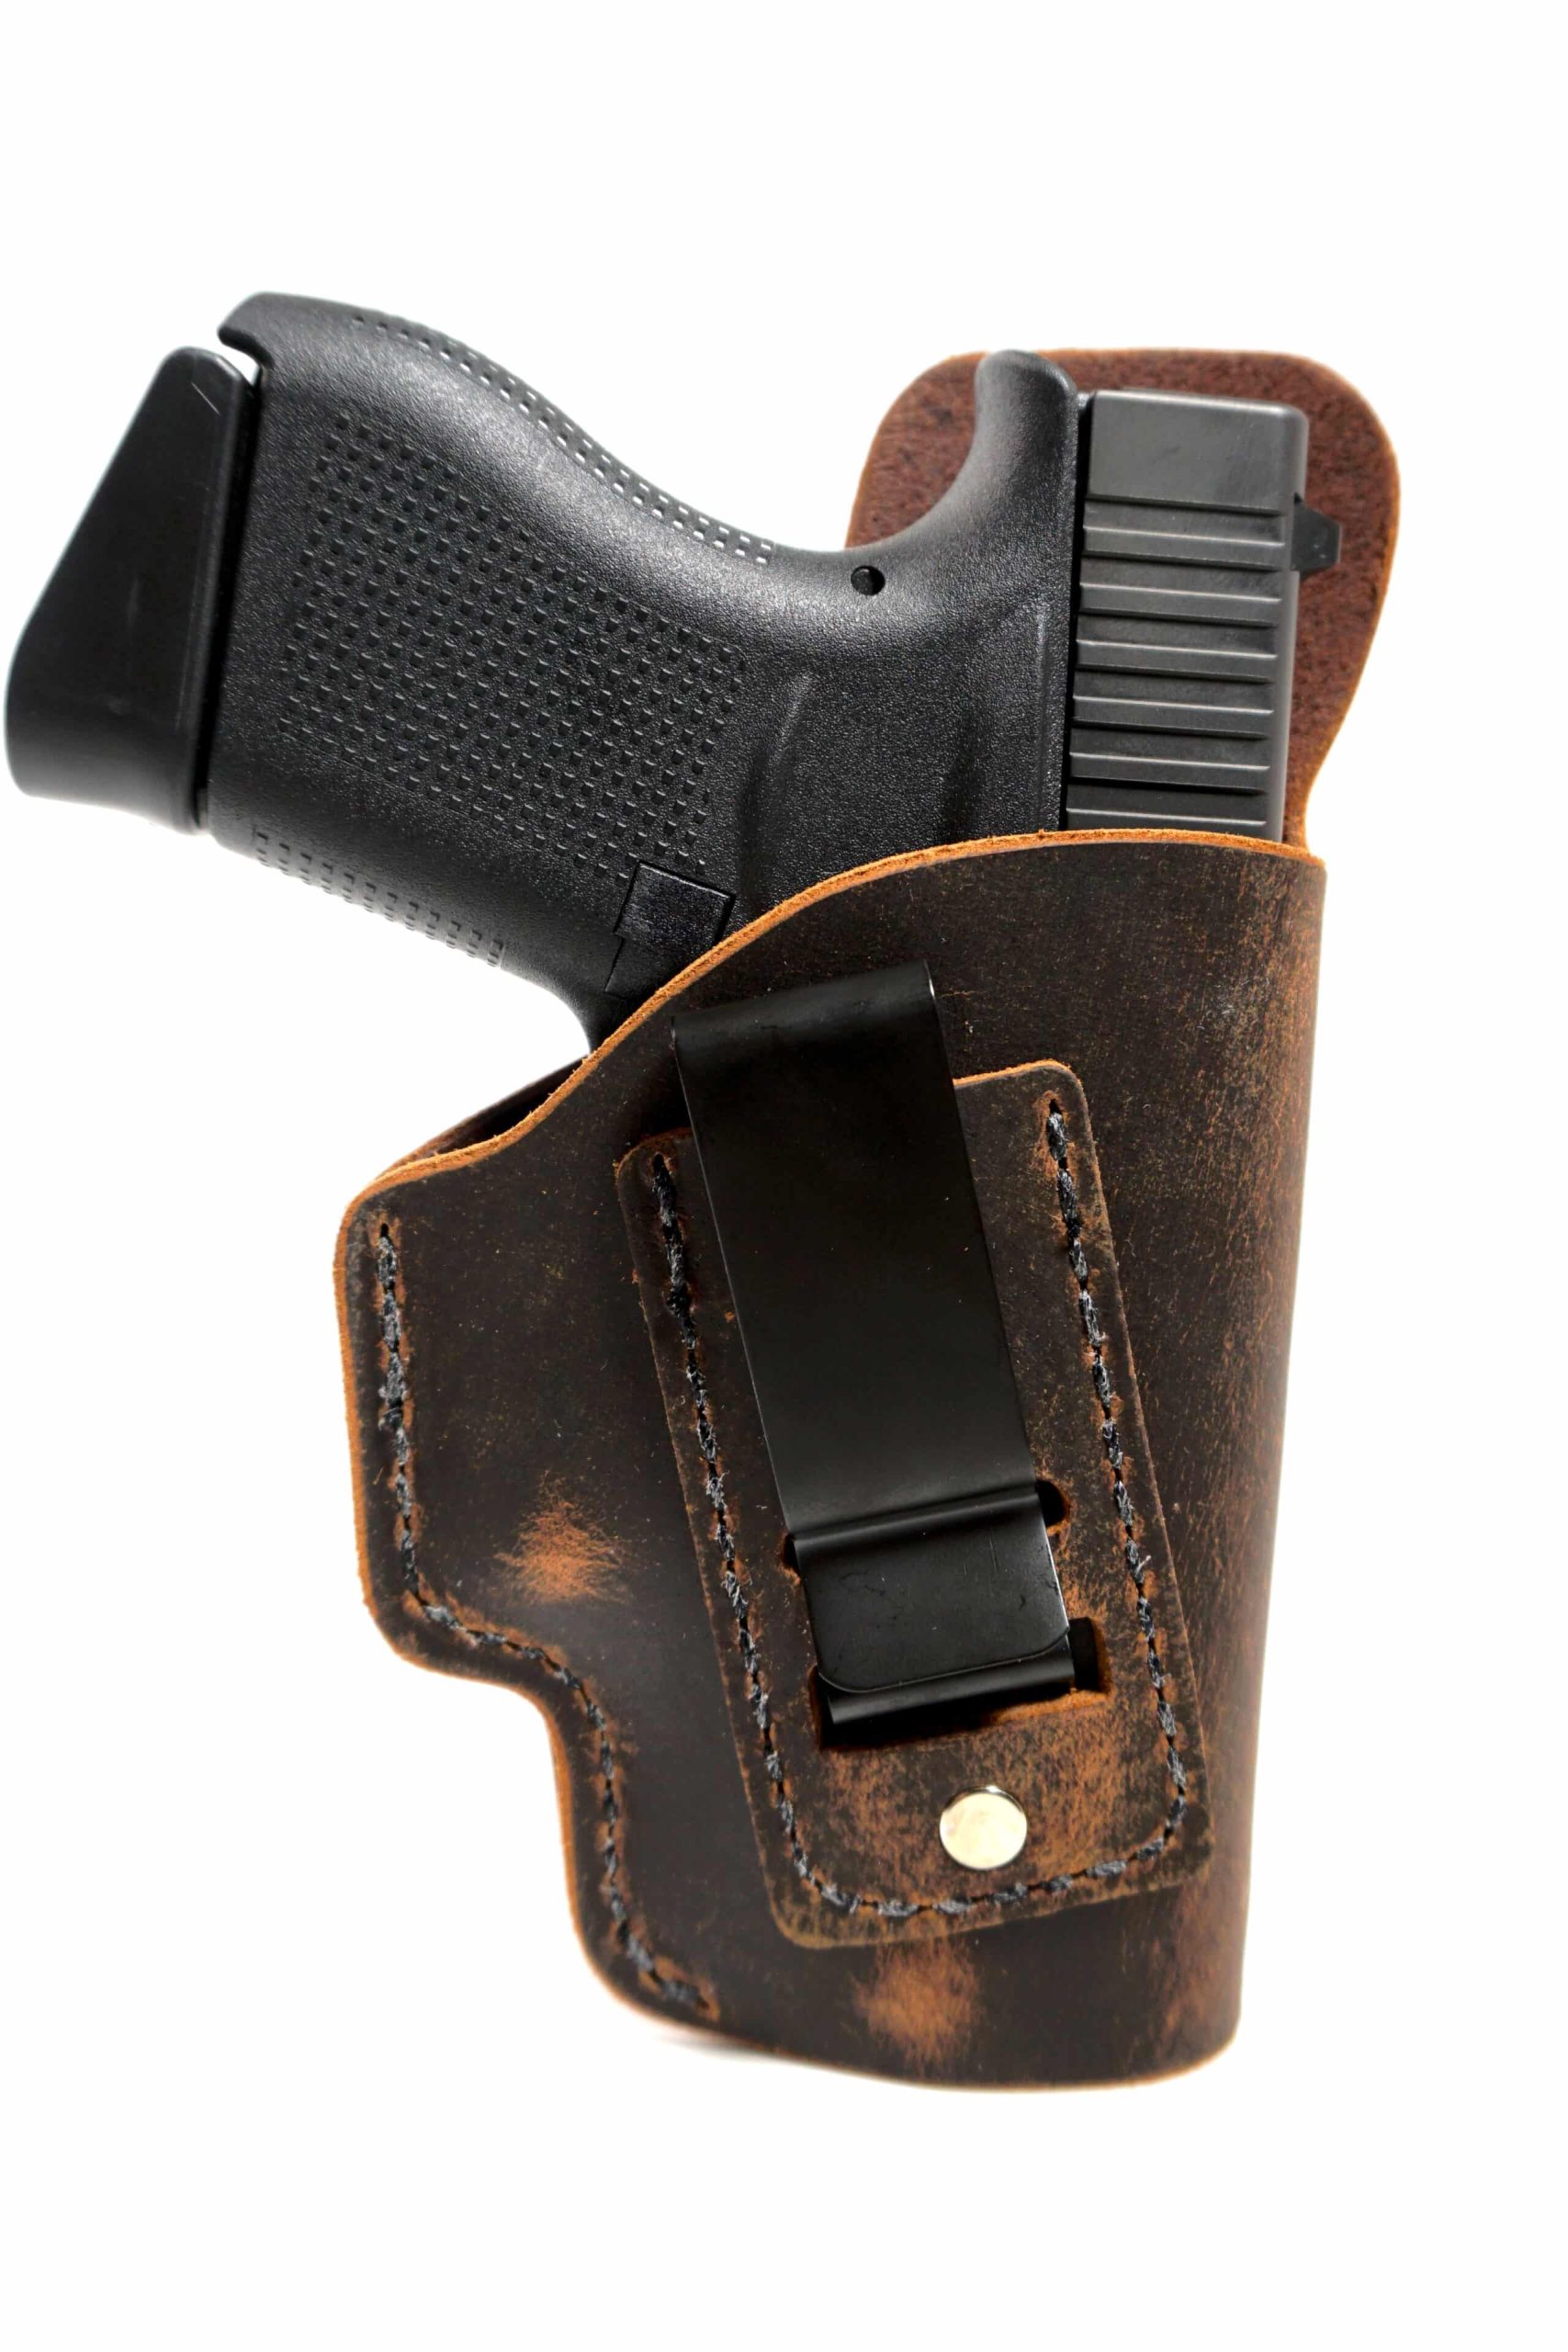 Smith and Wesson MP Compact IWB Leather Holster - Made in U.S.A.